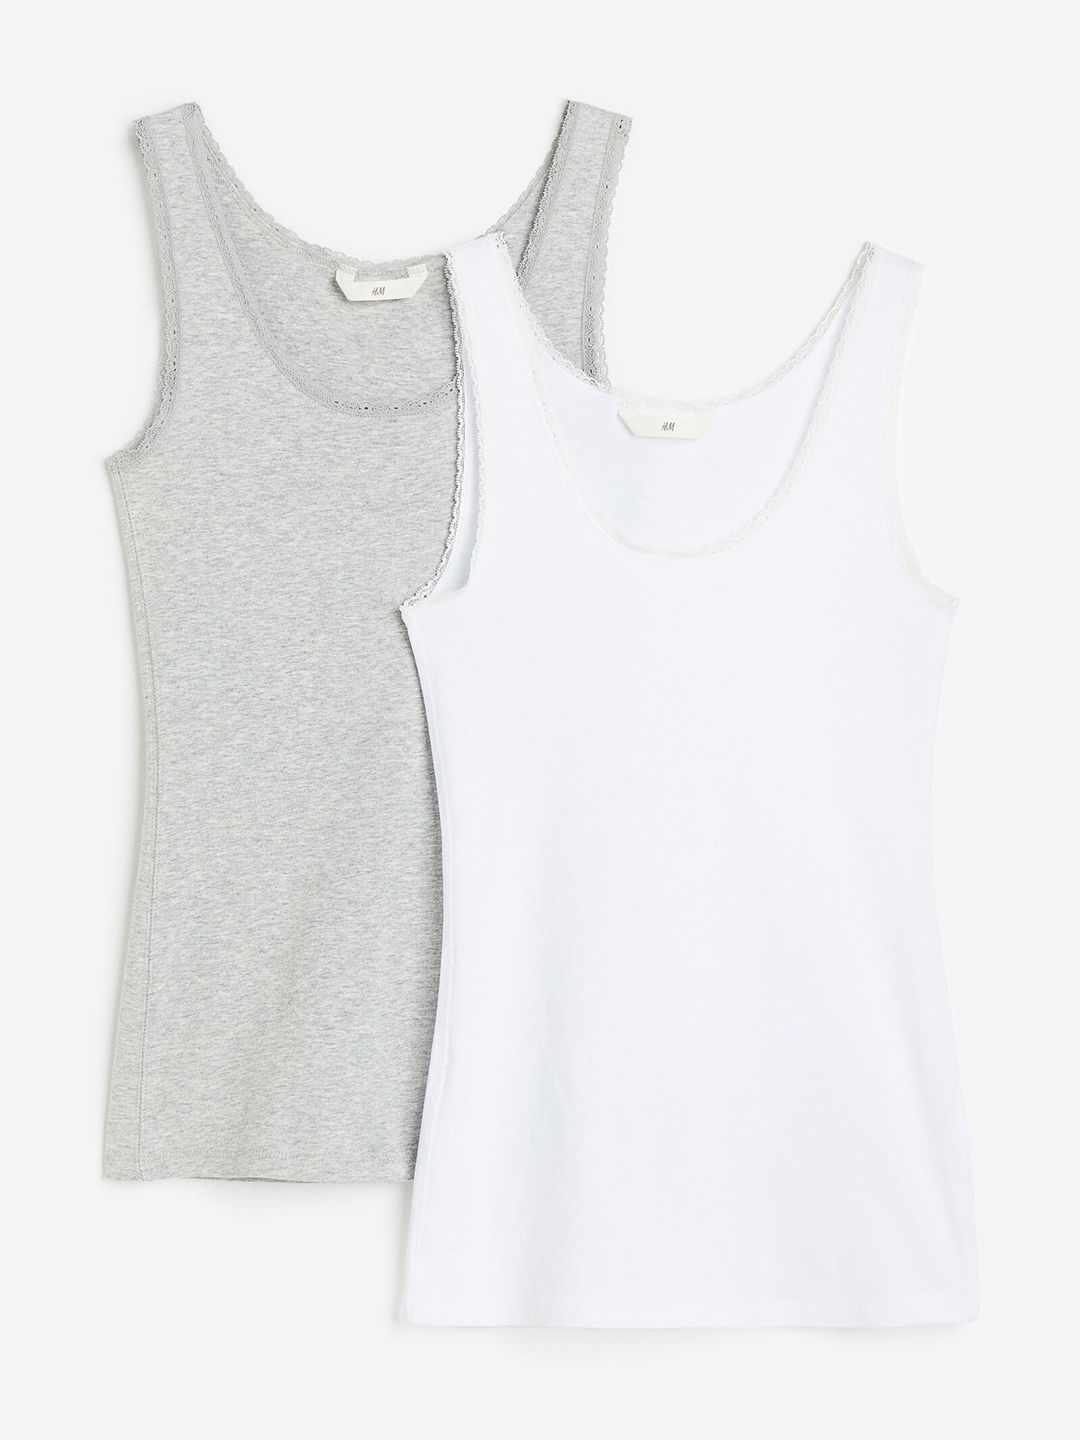 H&M 2-Pack Lace-Trimmed Vest Tops Price in India